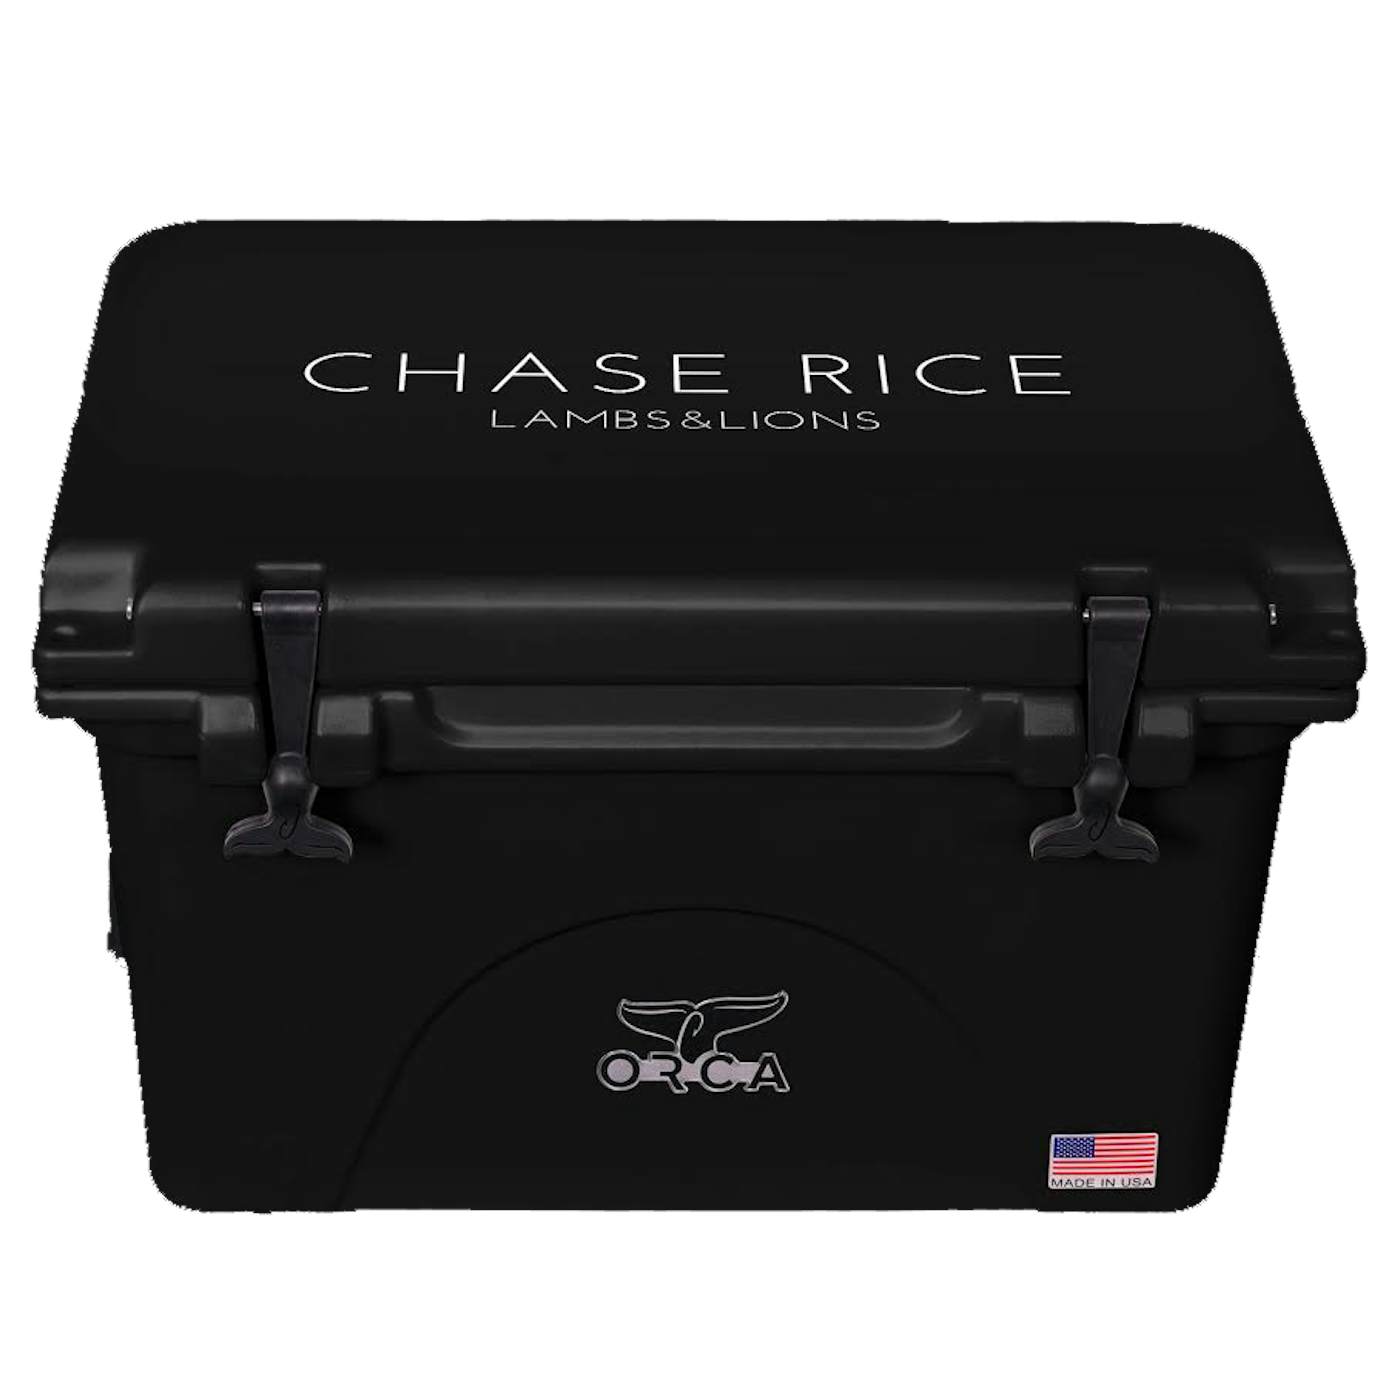 Chase Rice Lambs & Lions Cooler - 40qt